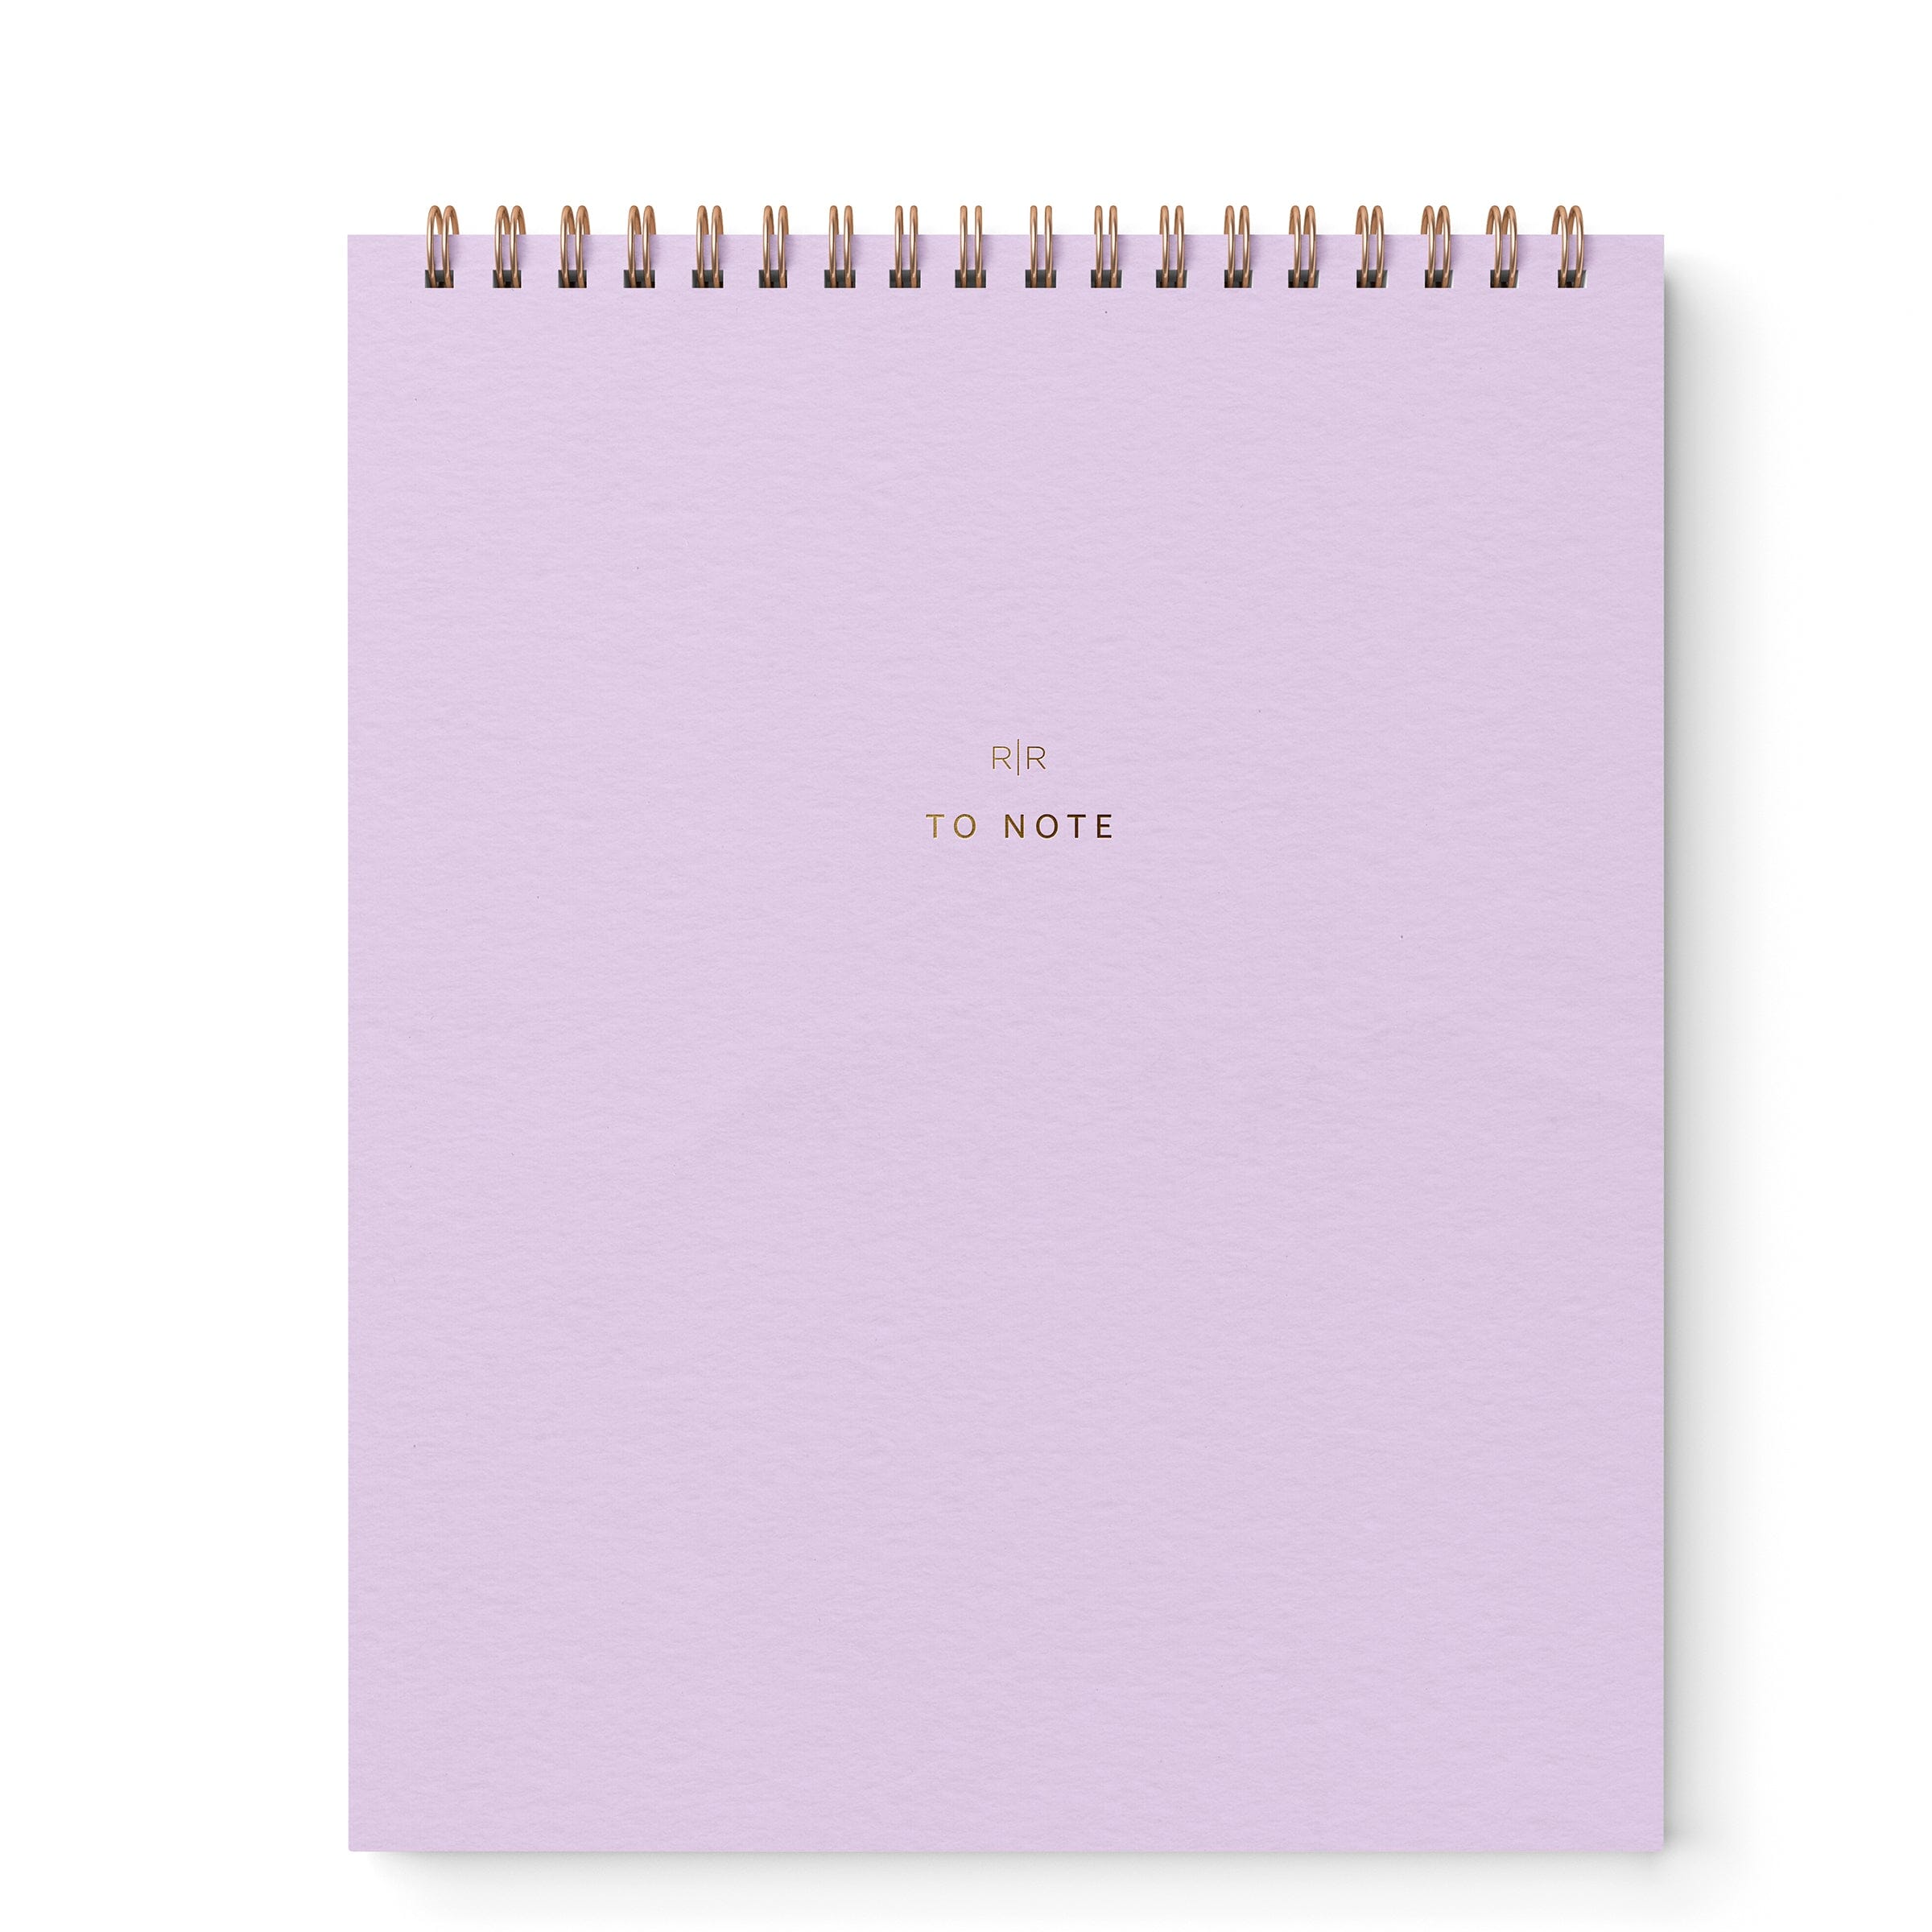 Sample Sale - To Note Lined Notebook - Ramona & Ruth Lavender 